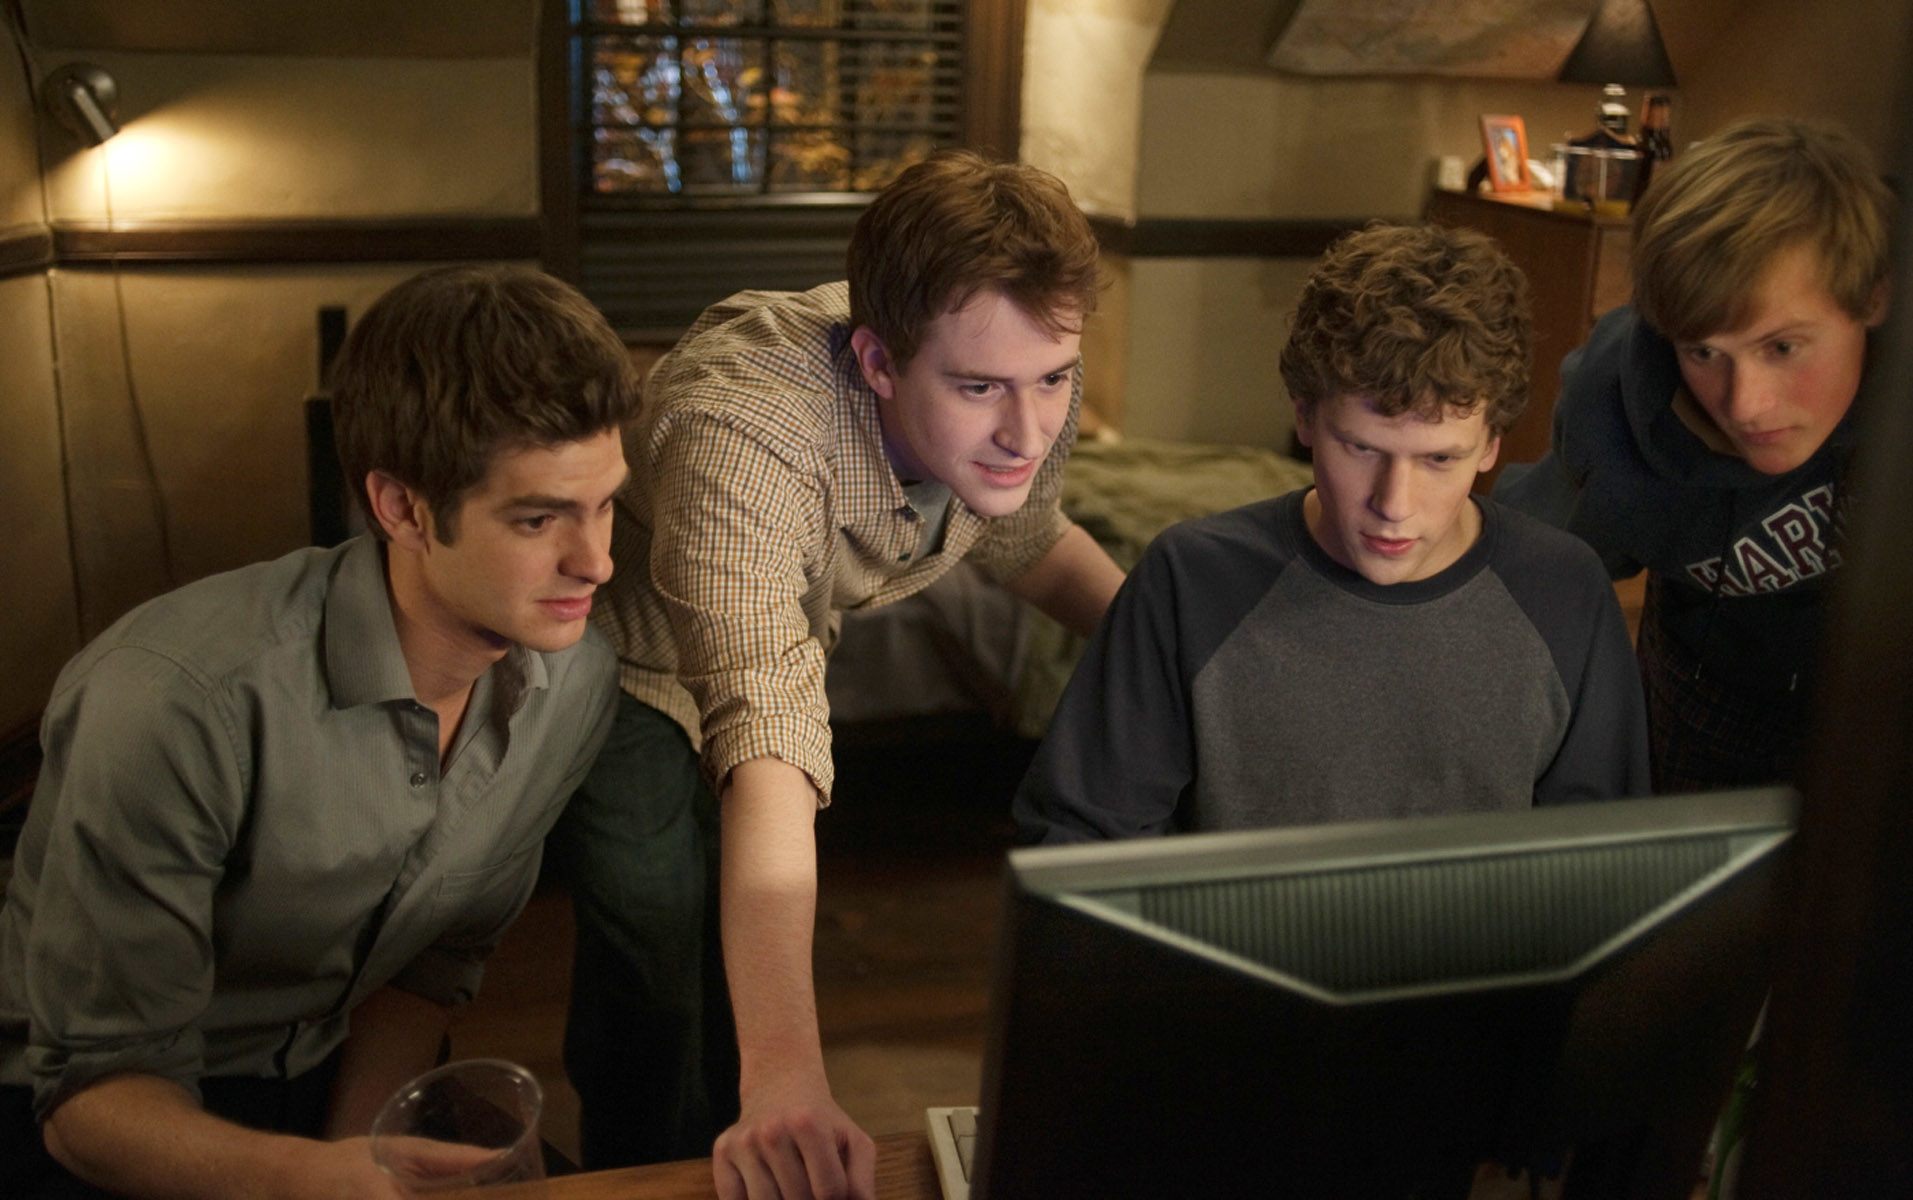 Four actors portraying friends gather closely around a computer screen in a scene